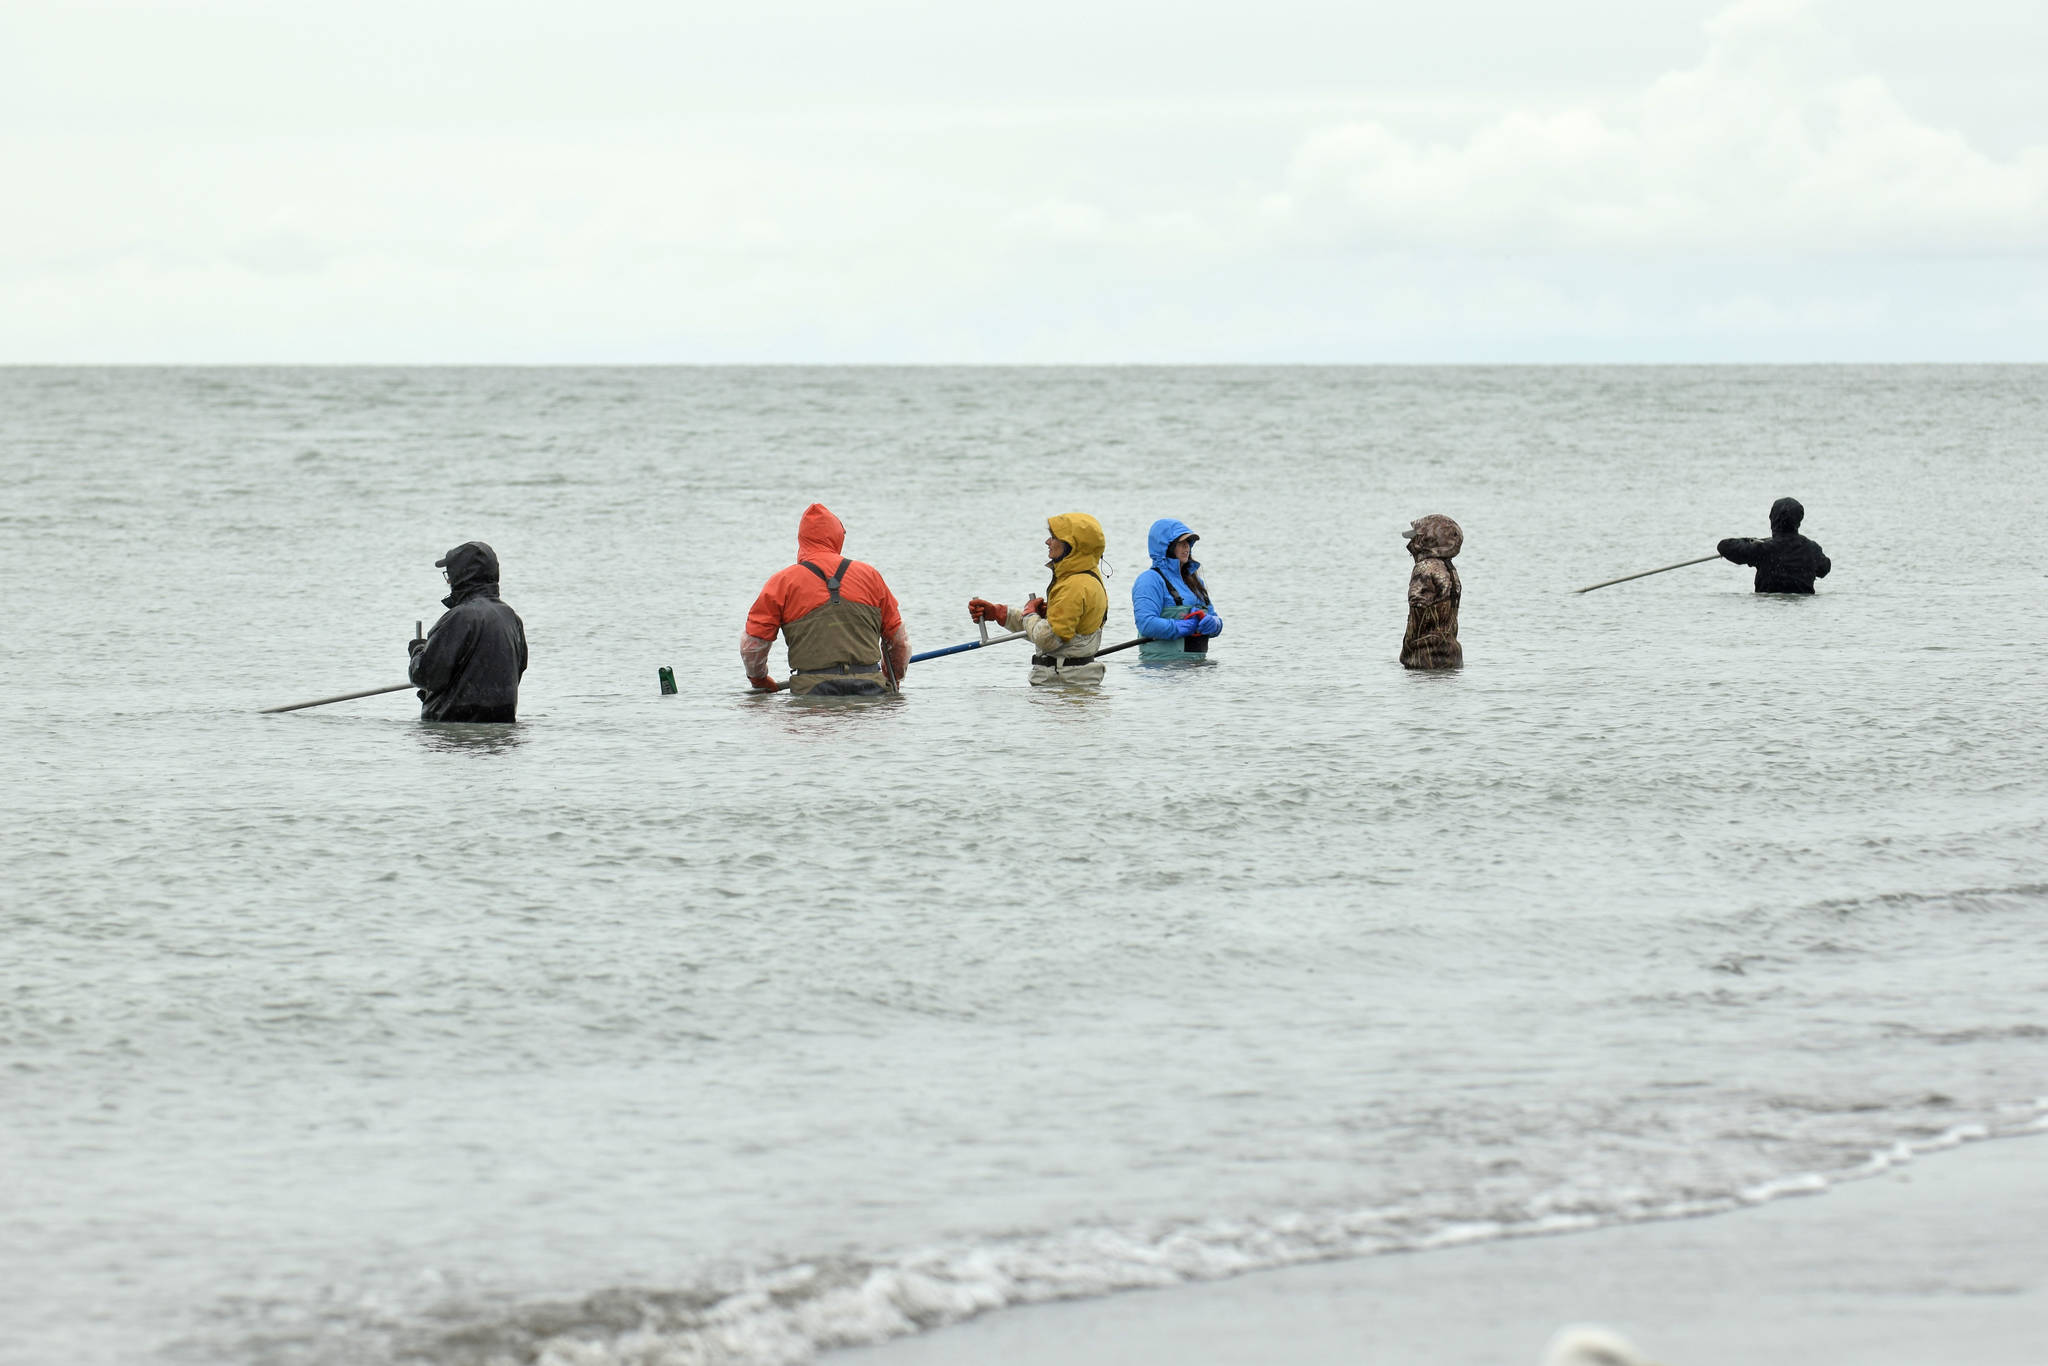 Dipnetters wade into the Cook Inlet in hopes of catching salmon on the first day of dipnetting season on Tuesday, July 10, 2018, in Kenai, Alaska. (Photo by Erin Thompson/Peninsula Clarion)